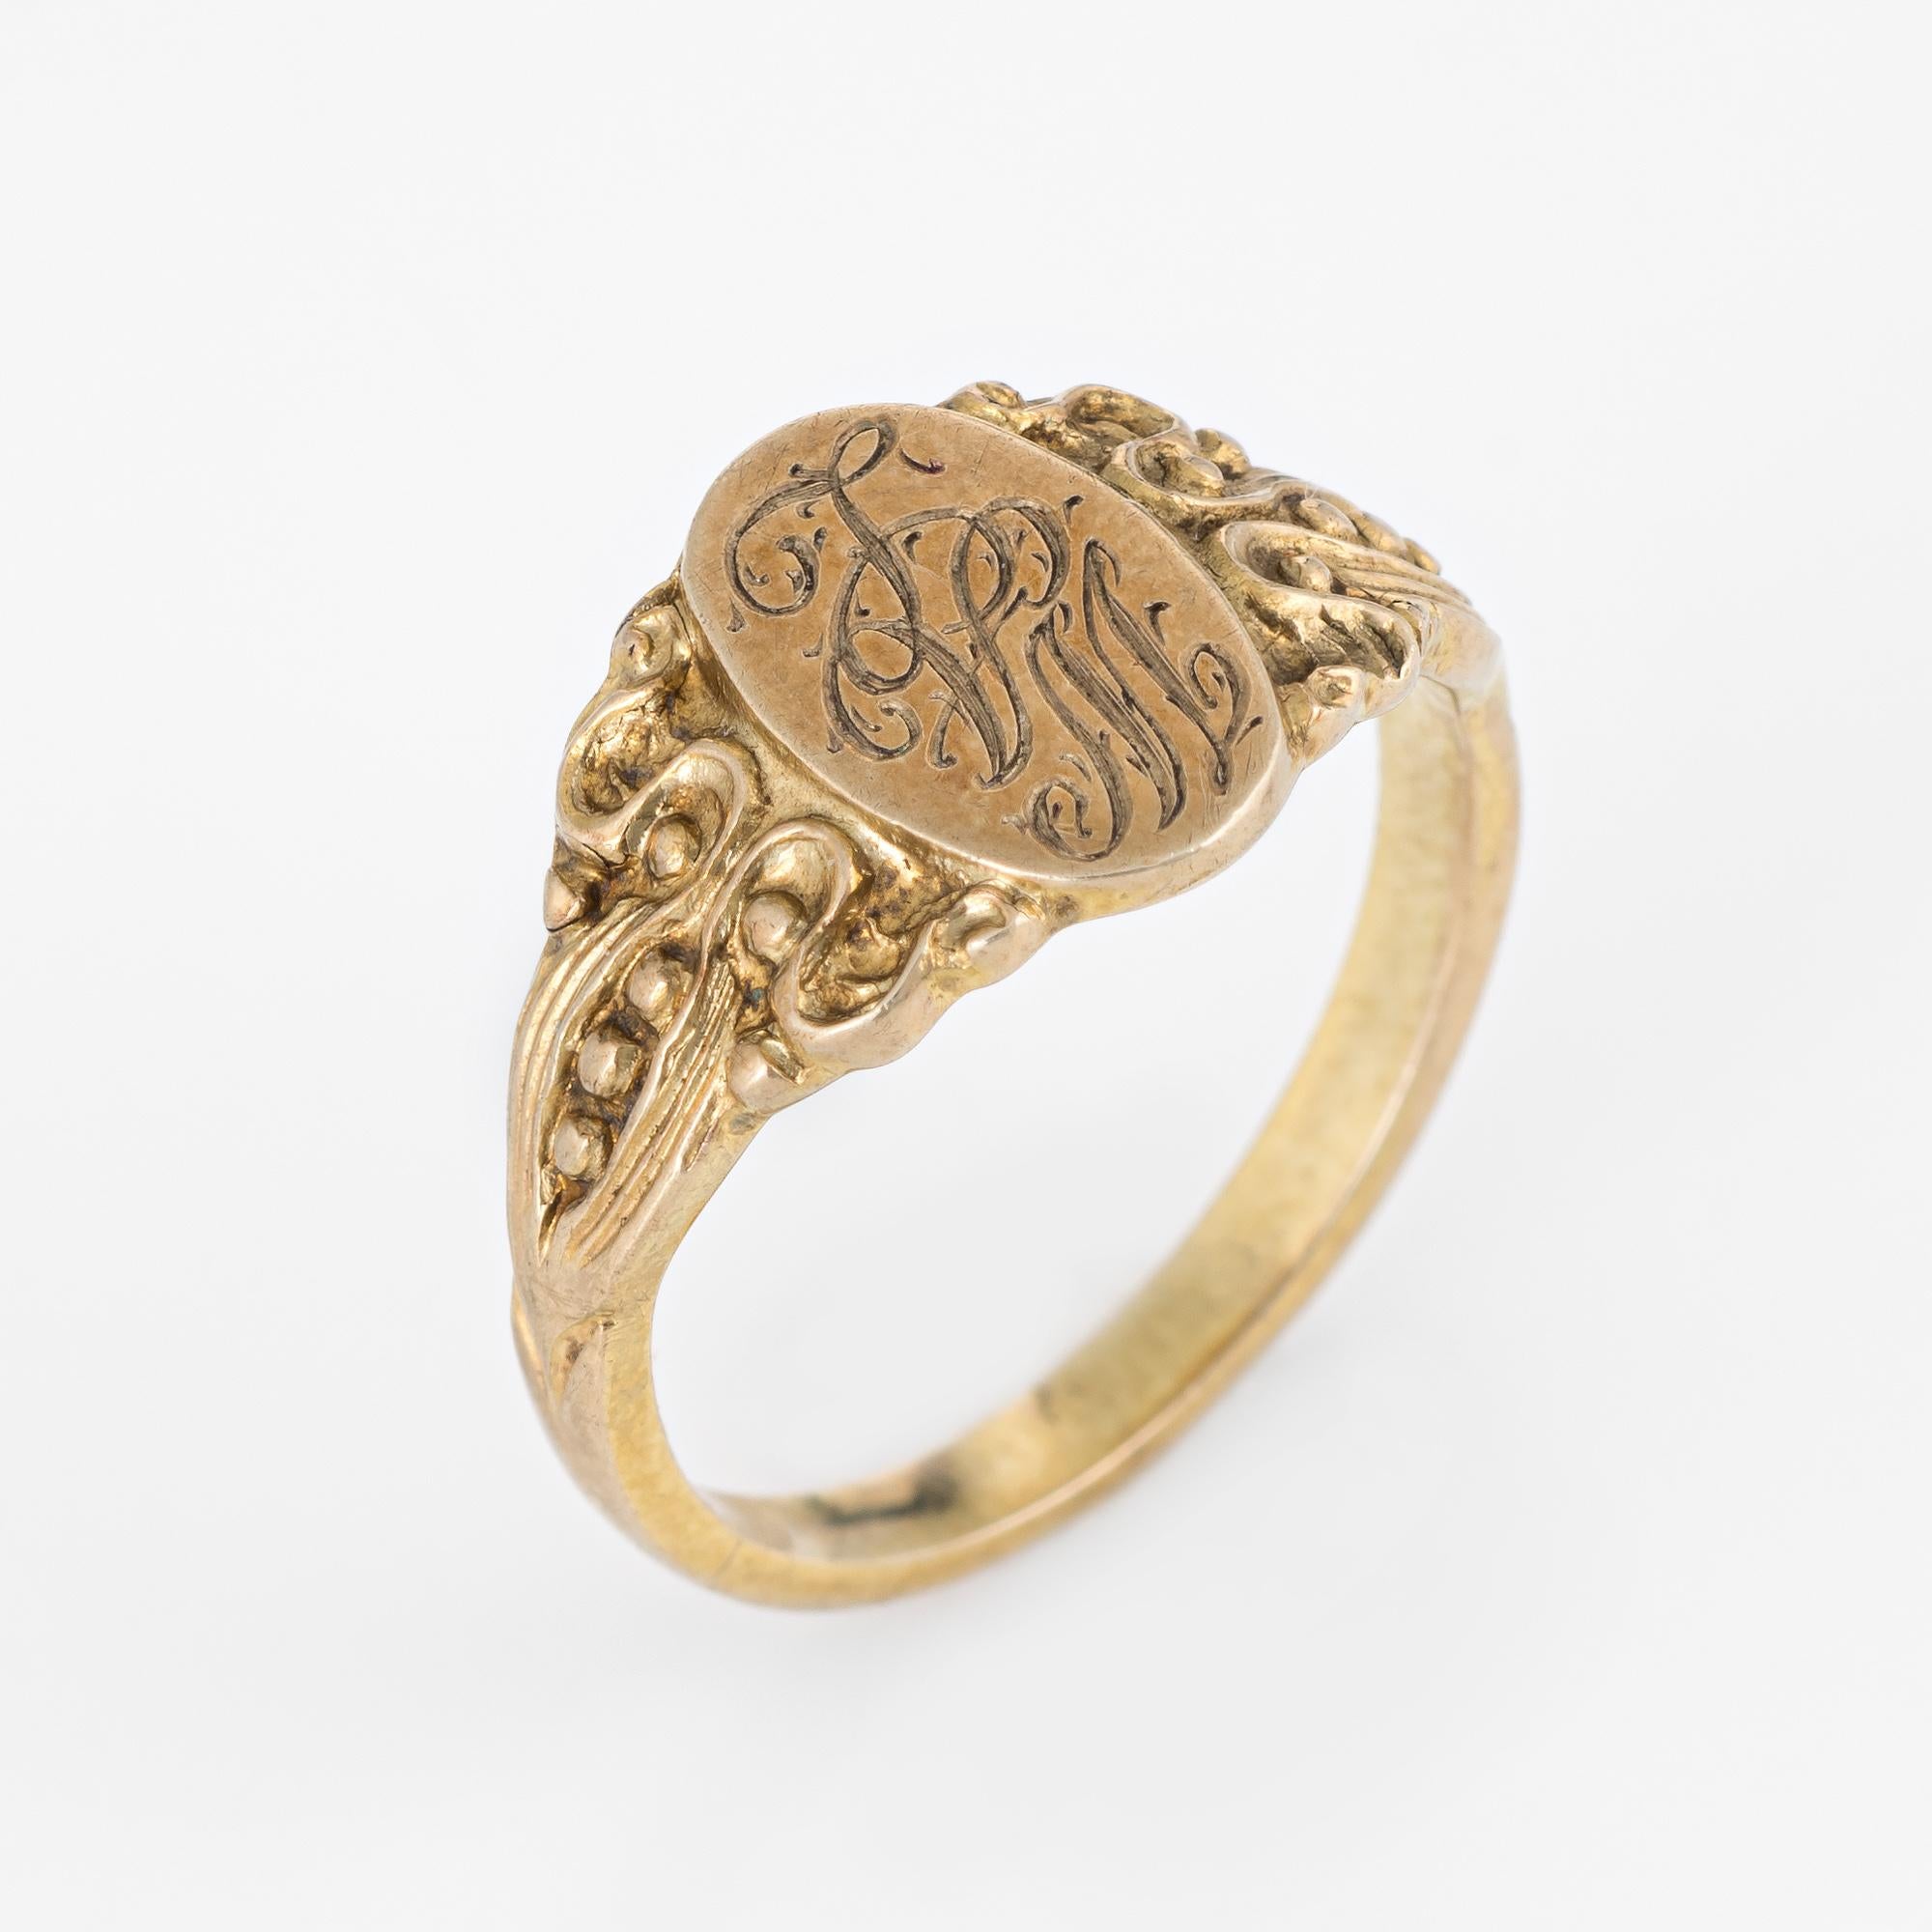 Lovely small antique Victorian signet ring (circa 1880s to 1900s), crafted in 10 karat yellow gold. 

The center oval is inscribed with the initials (from what we can decipher) 